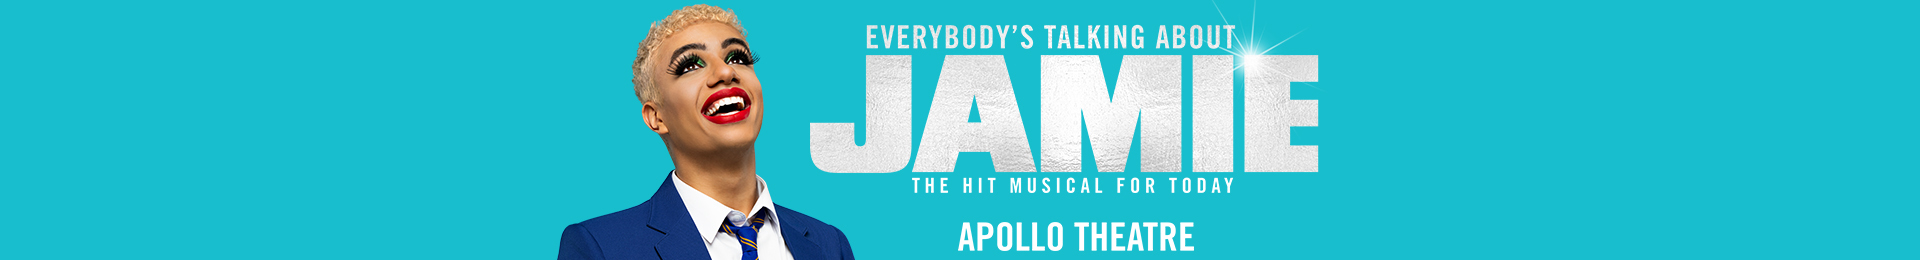 Everybody's Talking About Jamie banner image